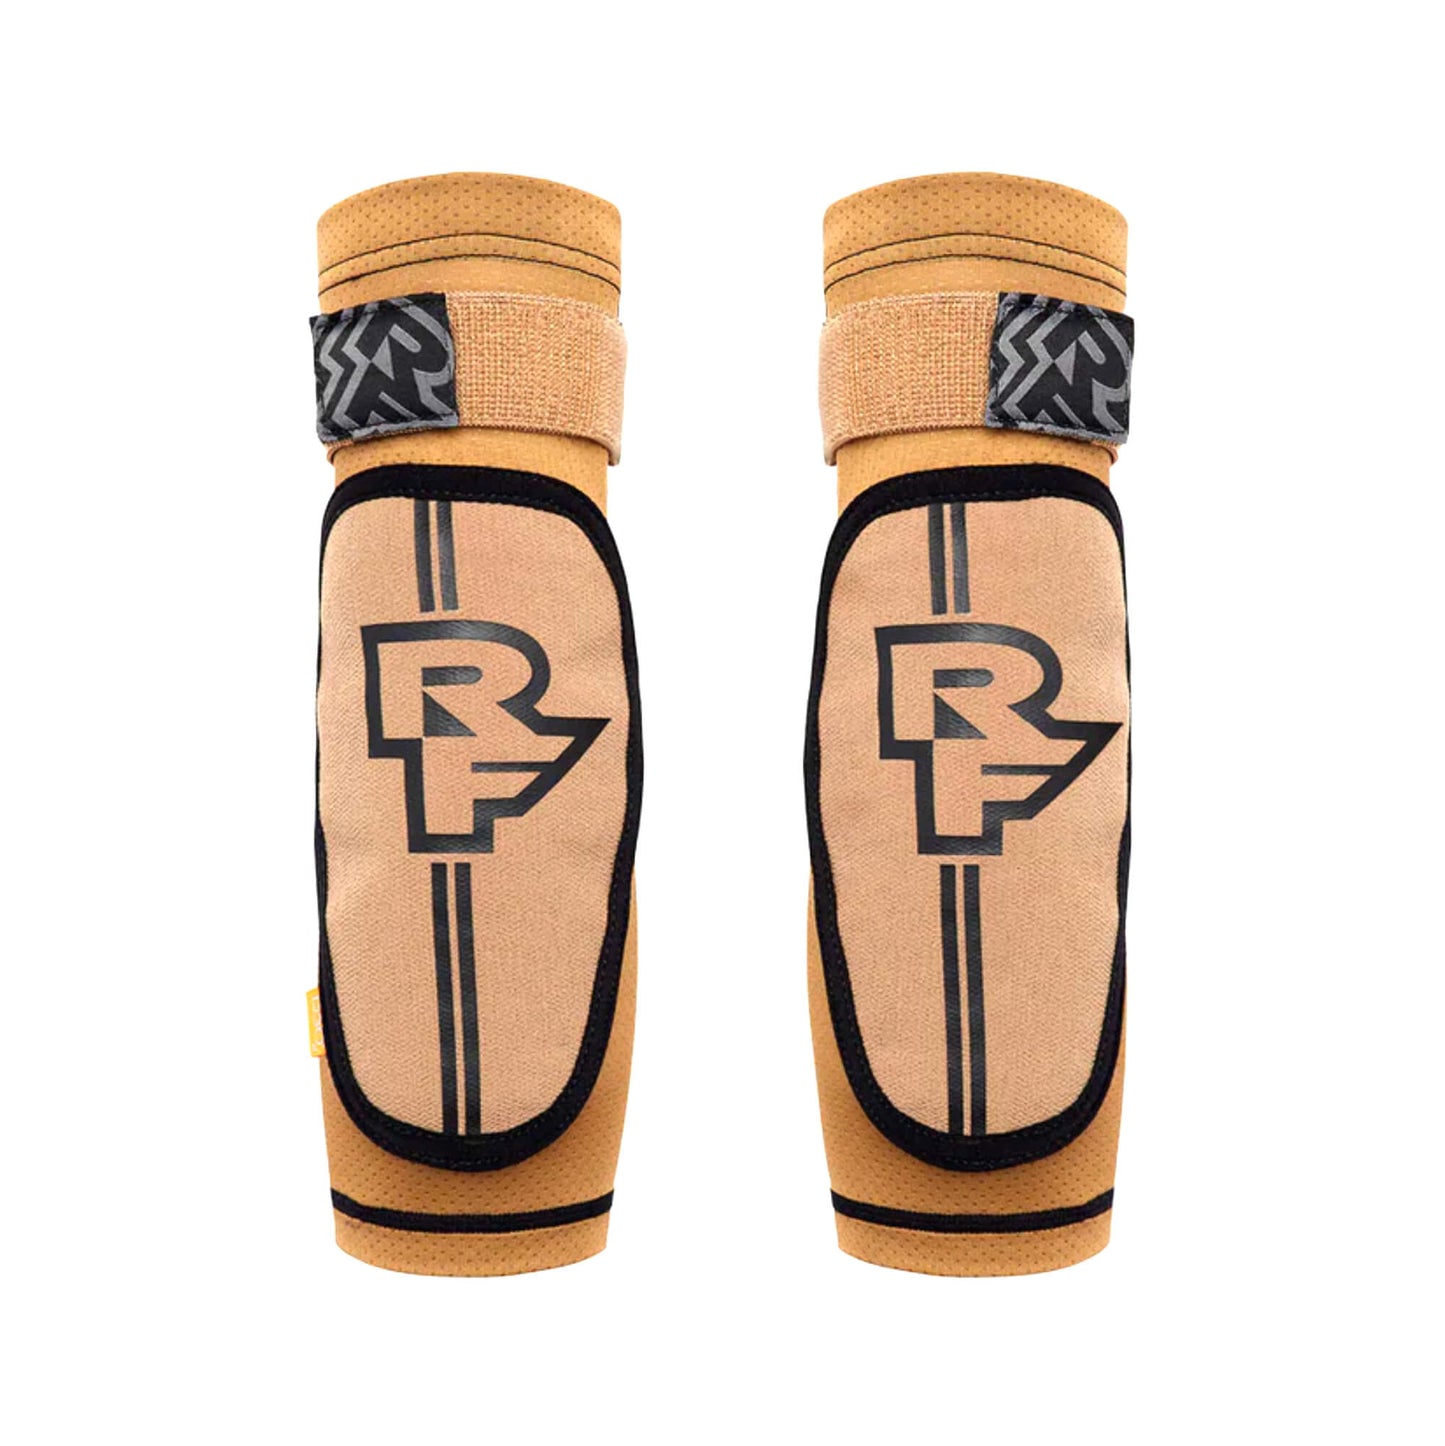 Race Face Indy Elbow Pads